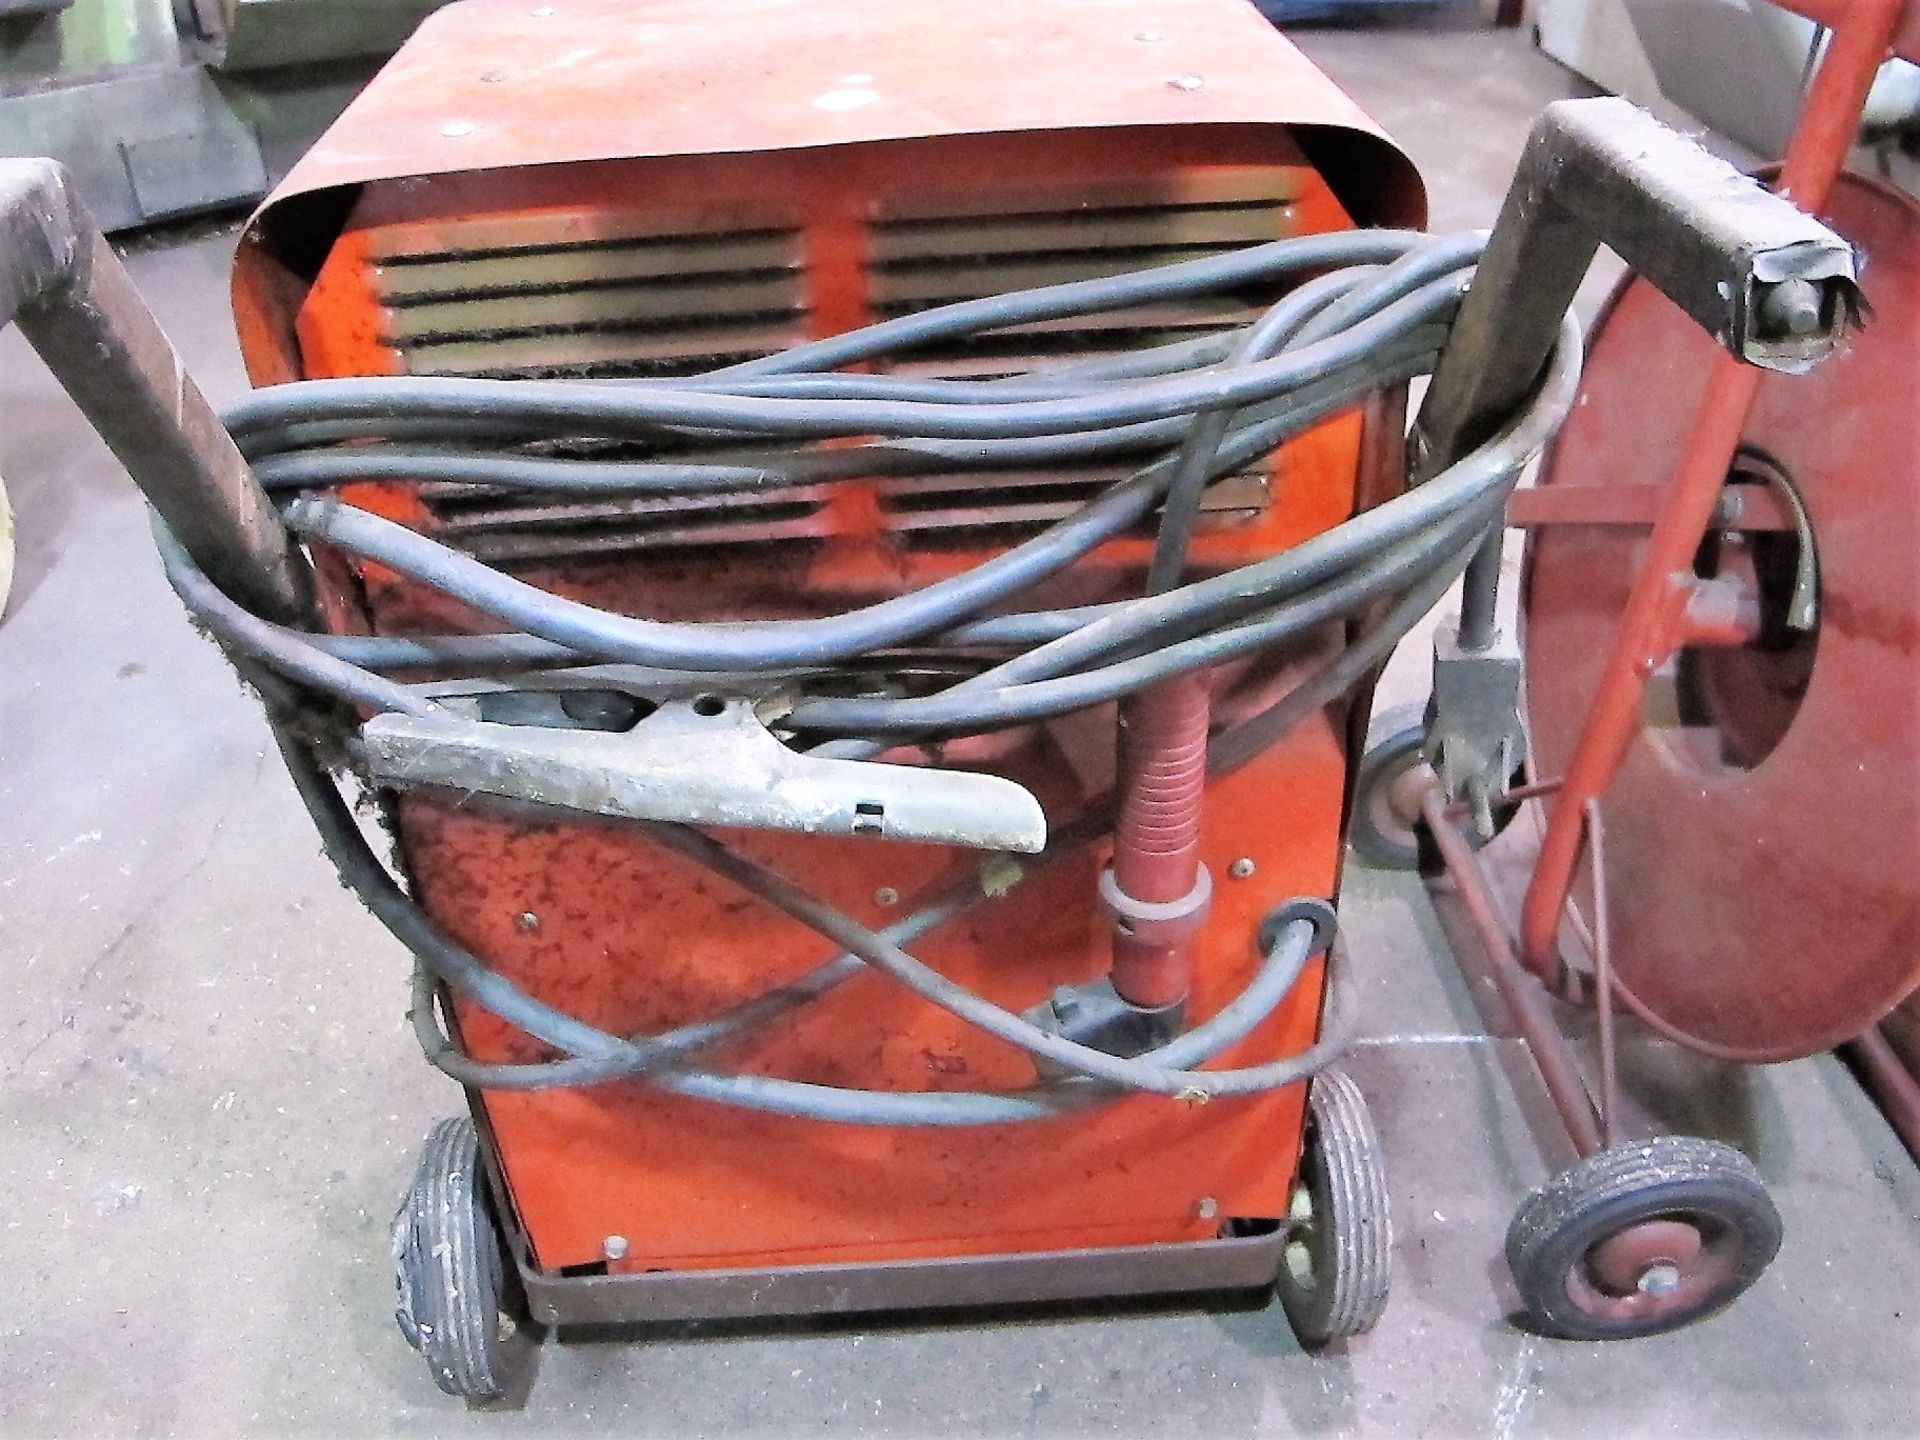 LINCOLN ELECTRIC AC 2255 WELDER W/CABLES - Image 2 of 2